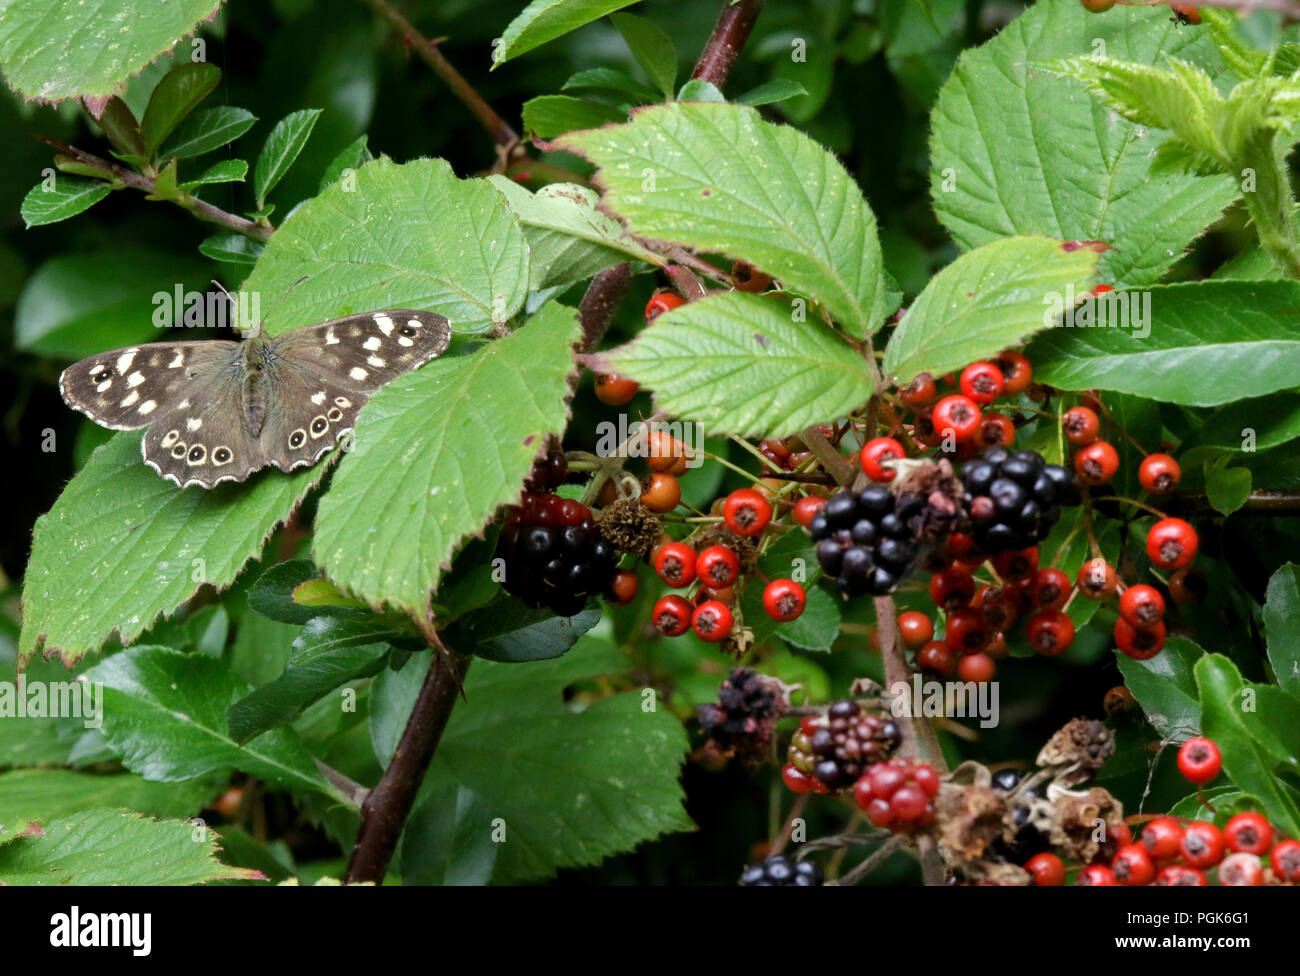 Oxford Island, Lough Neagh, Northern Ireland. 27 August 2018. UK weather - a mainly grey day with a moderate westerly wind bring the occasional bright spell. Sheltered from the wind, a speckled wood butterfly on a leaf beside autumn berries. Credit: David Hunter/Alamy Live News. Stock Photo